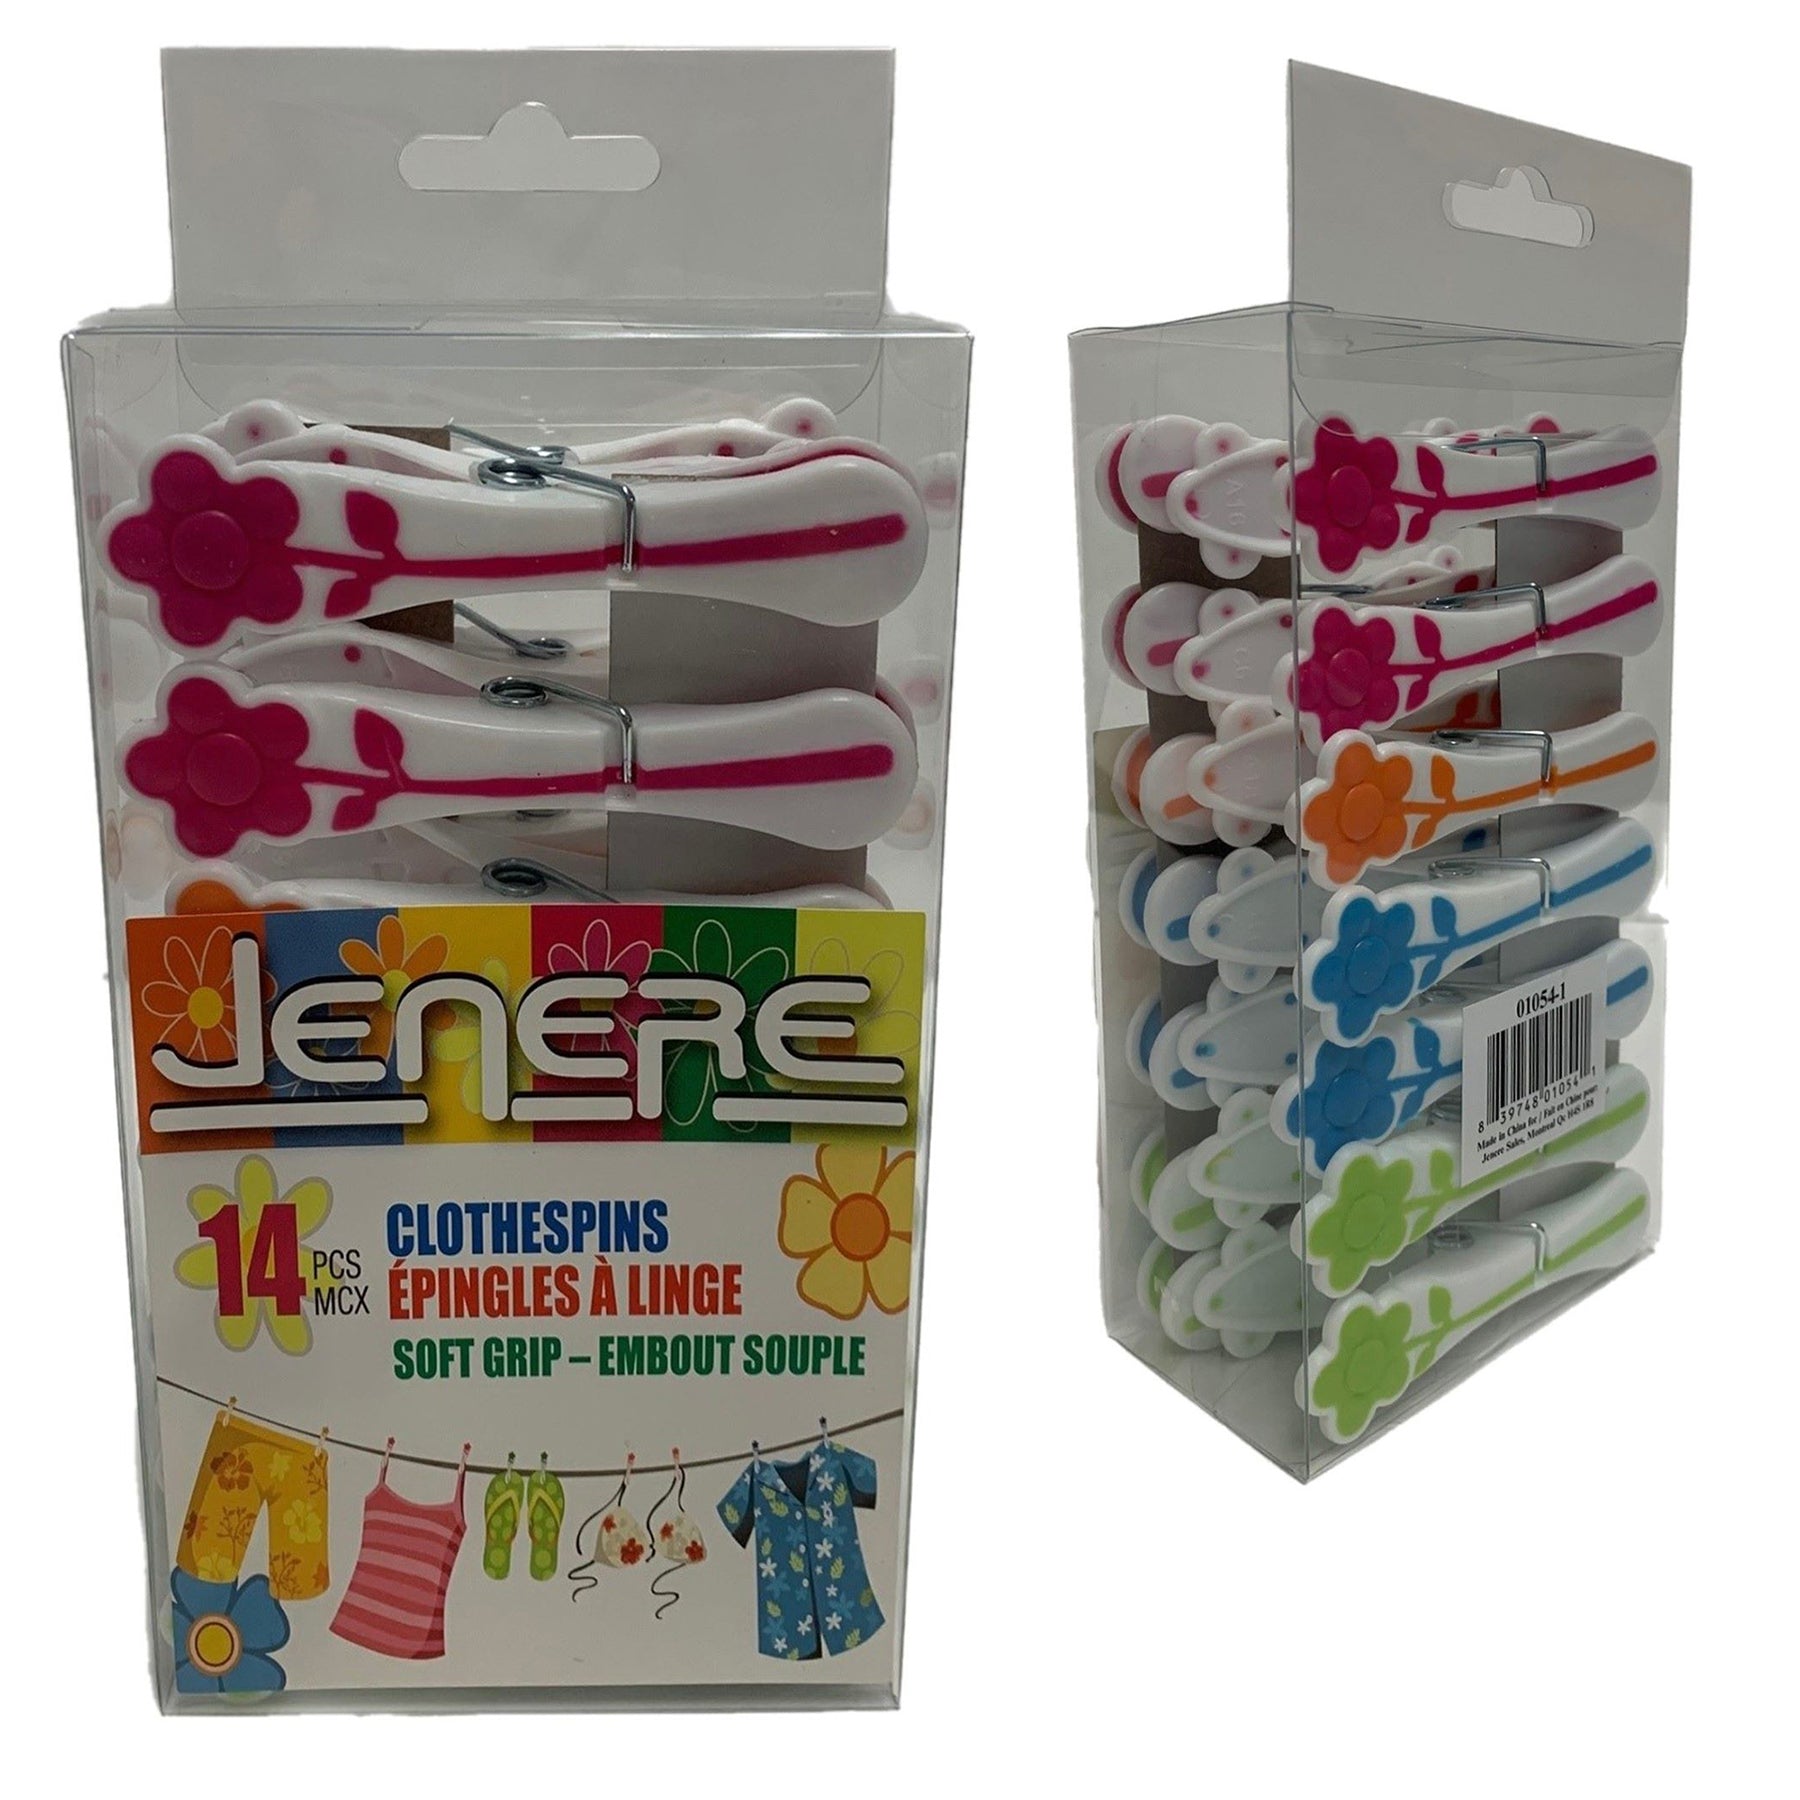 Jenere 14 Plastic Clothespins - Flower Printed 3.4x0.75in